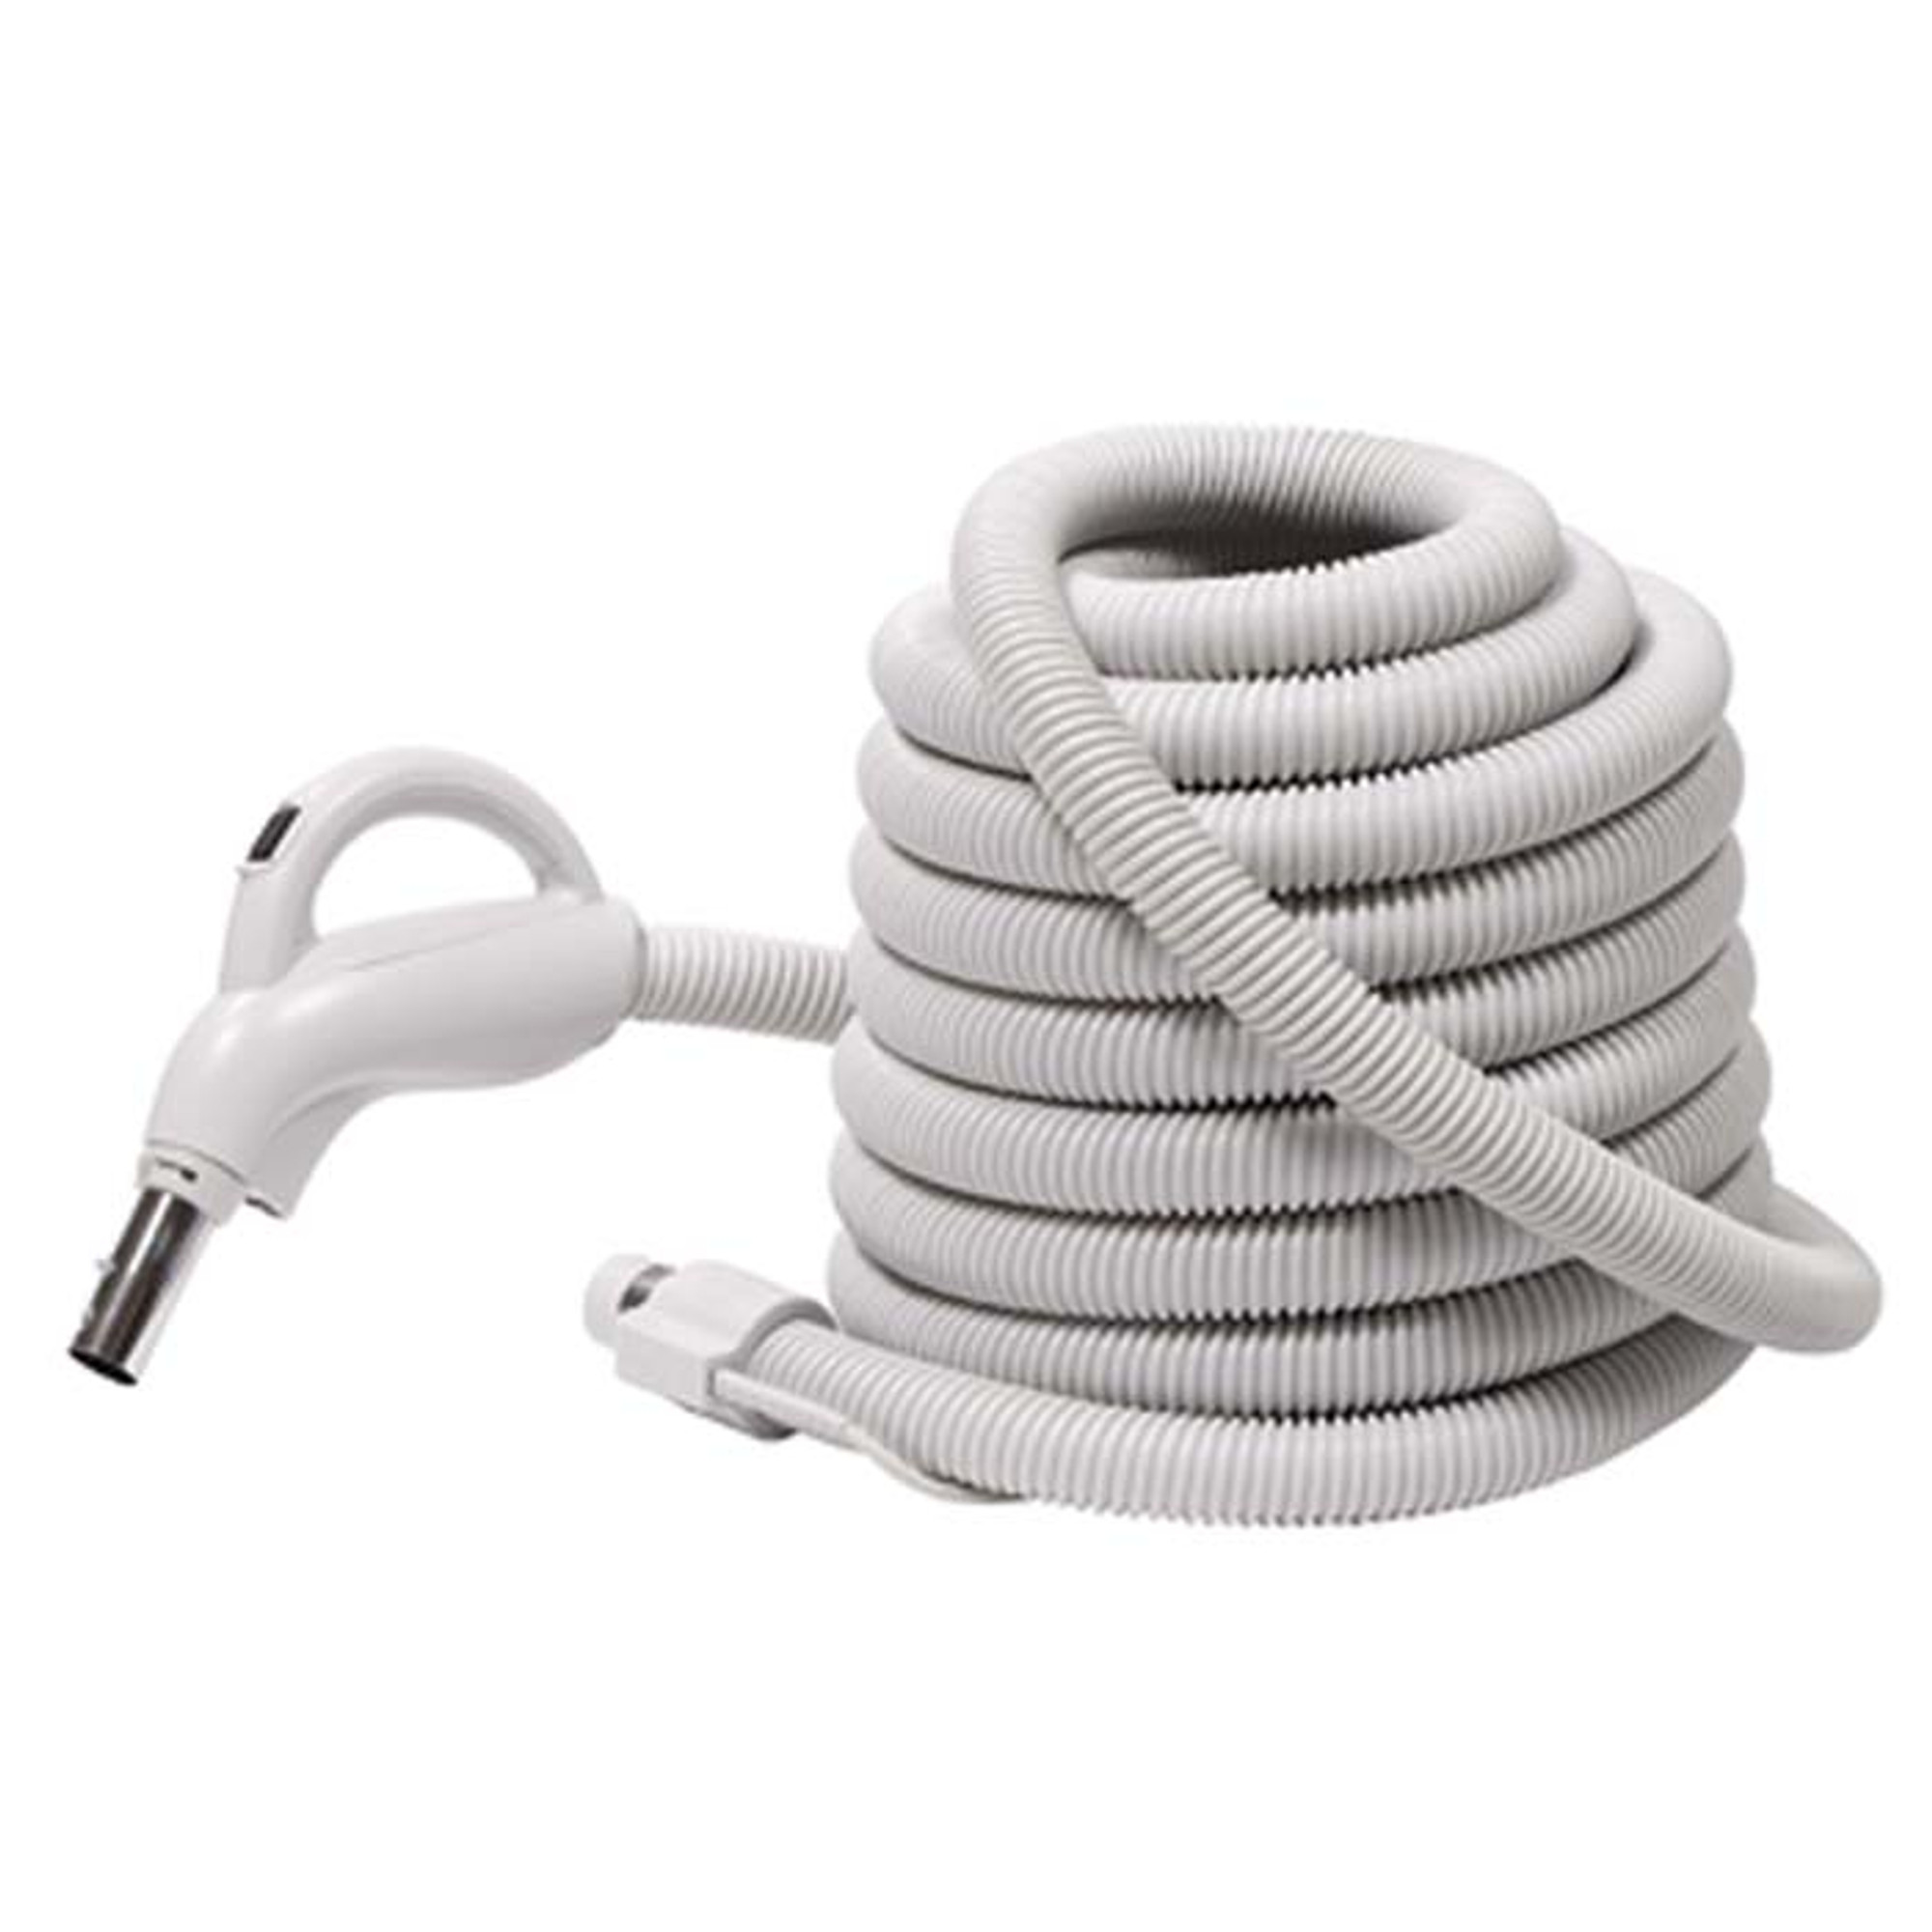 https://cdn11.bigcommerce.com/s-37777/images/stencil/2000x2000/products/1565/4314/central_vacuum_replacement_hose_30__73890.1444317215.jpg?c=2